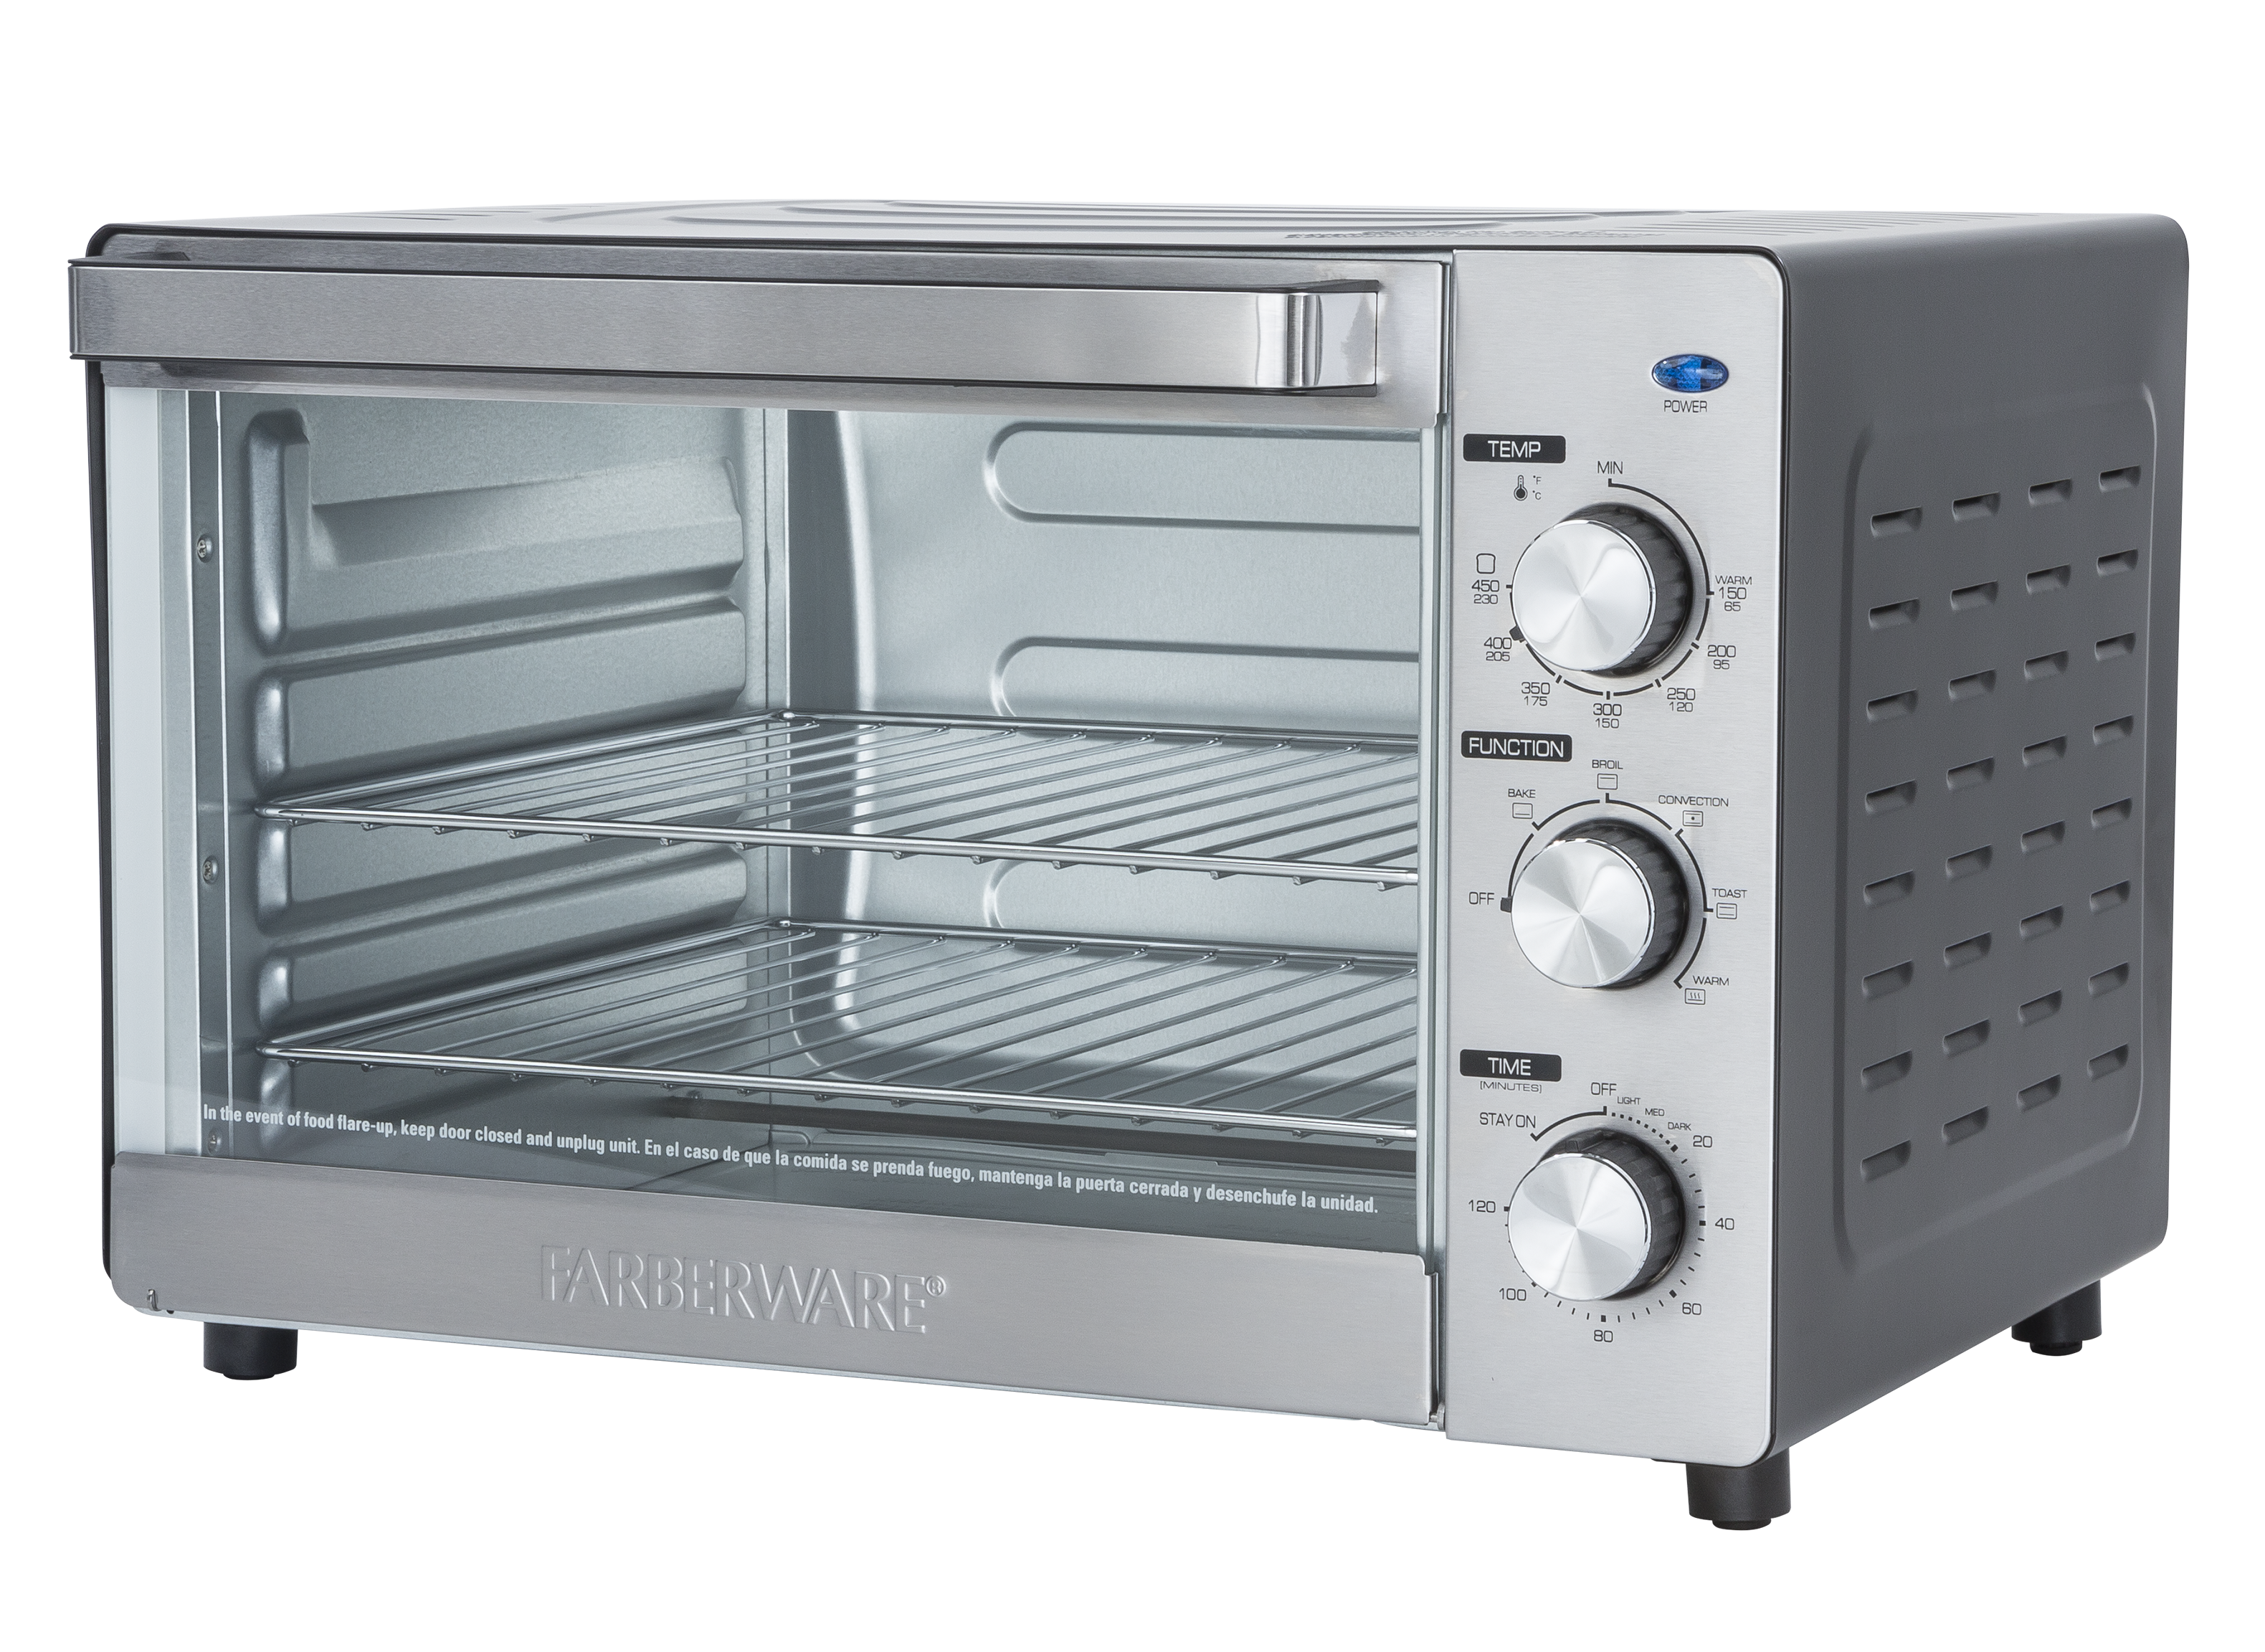 https://crdms.images.consumerreports.org/prod/products/cr/models/389600-toasterovens-farberware-9slice550076.png